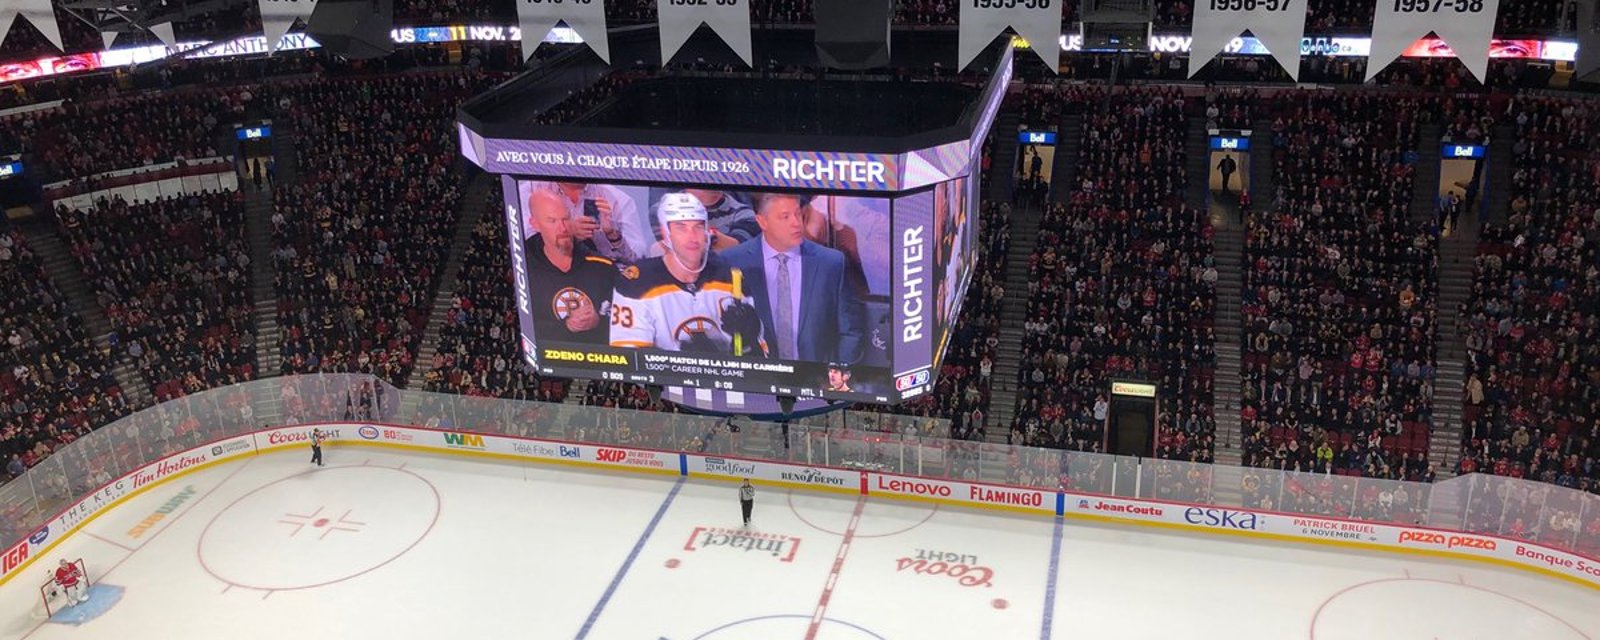 Habs fans surprise everyone and offers warming tribute to Chara